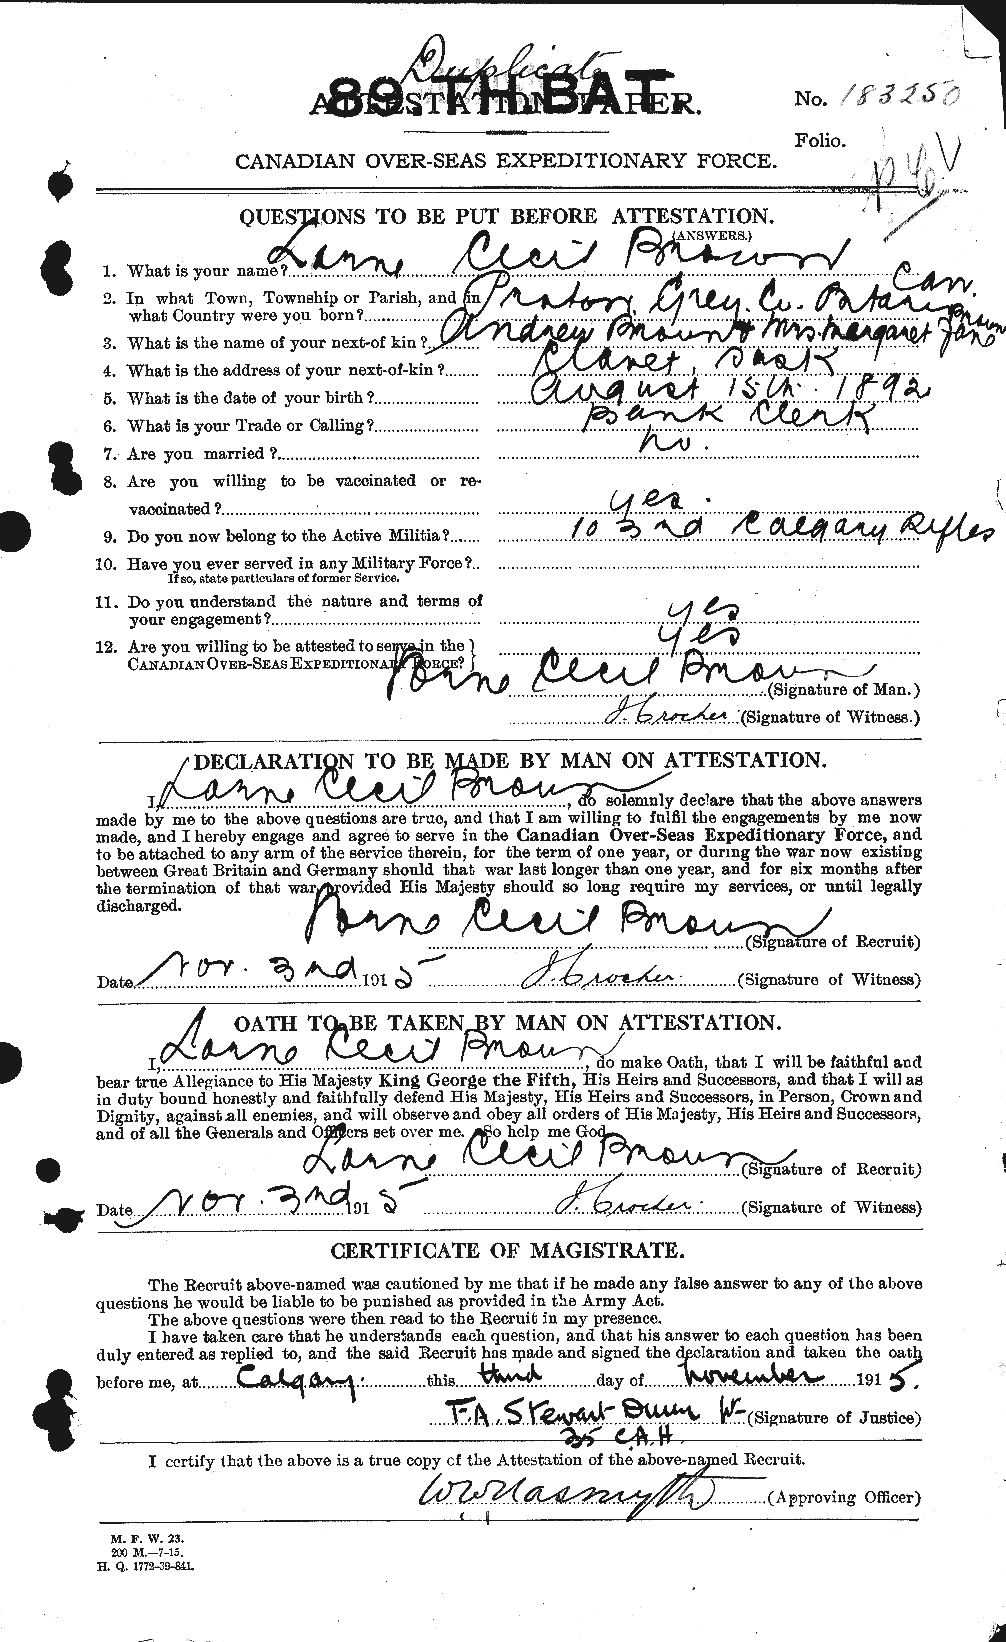 Personnel Records of the First World War - CEF 266335a